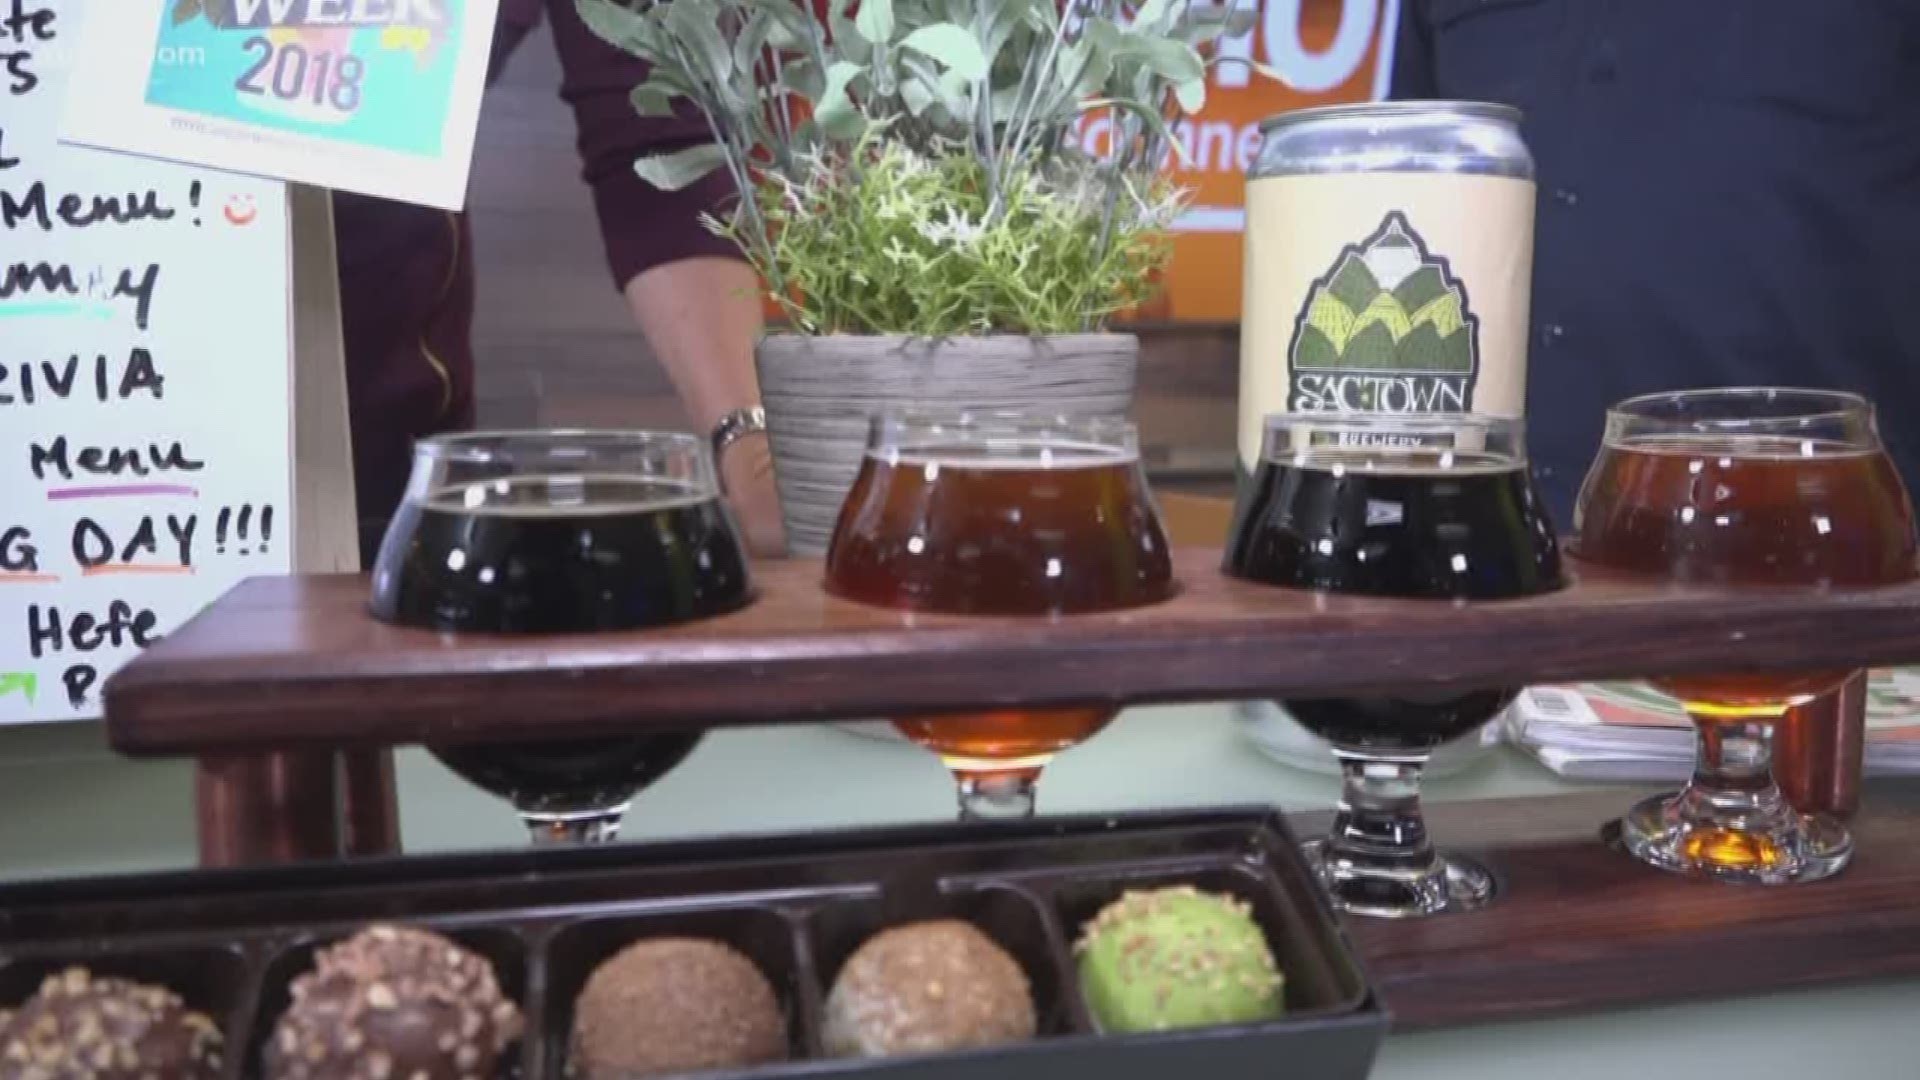 Sactown Union Brewery is hosting a chocolate and beer pairing for Mother's Day.